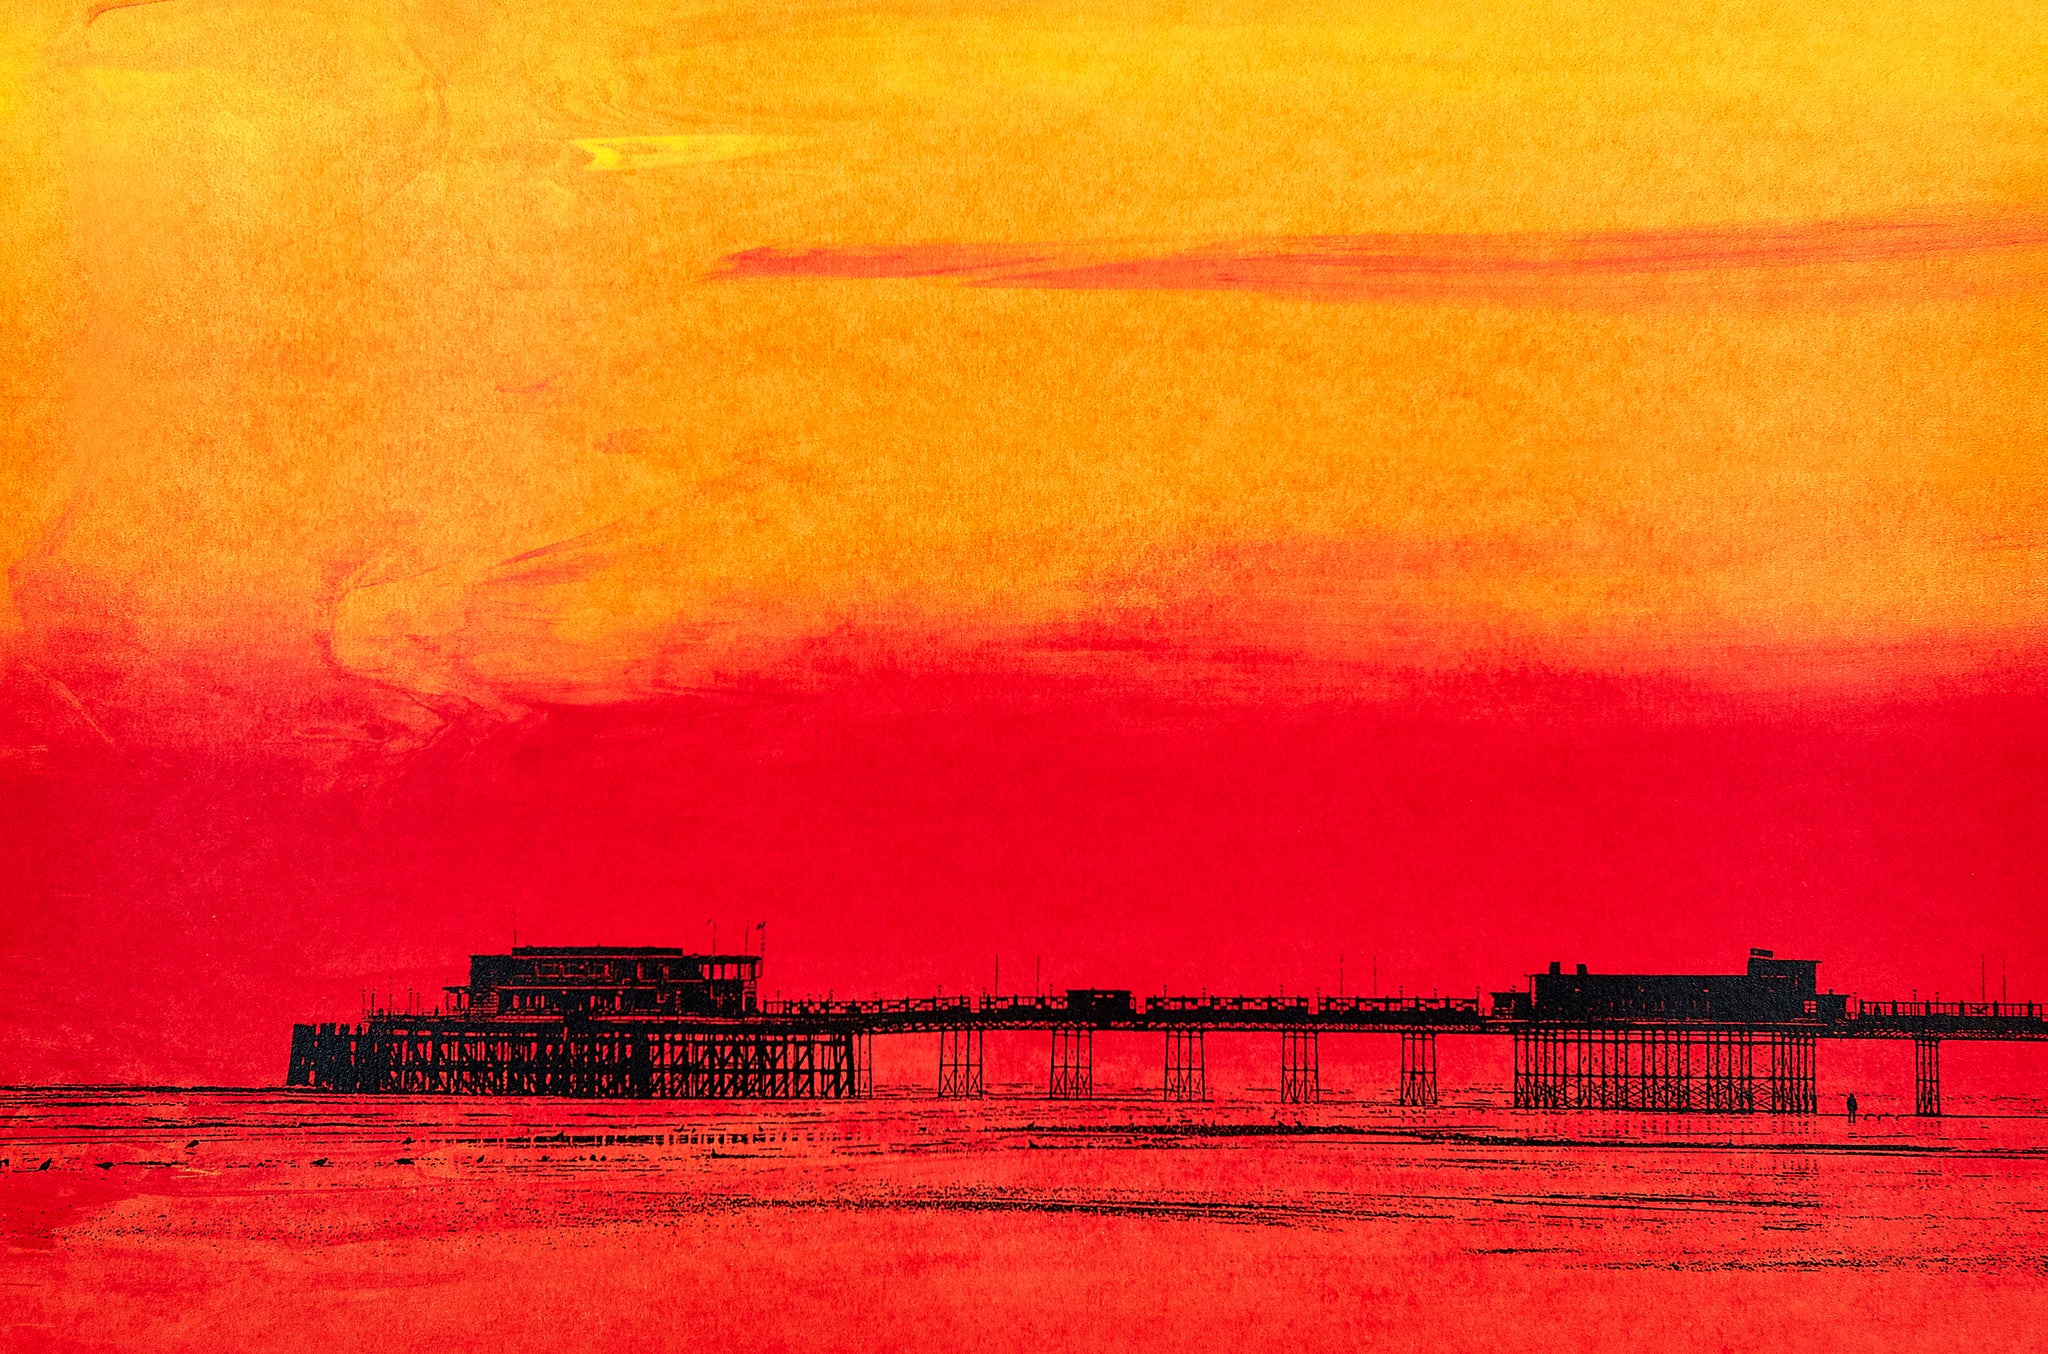 Man and Pier print